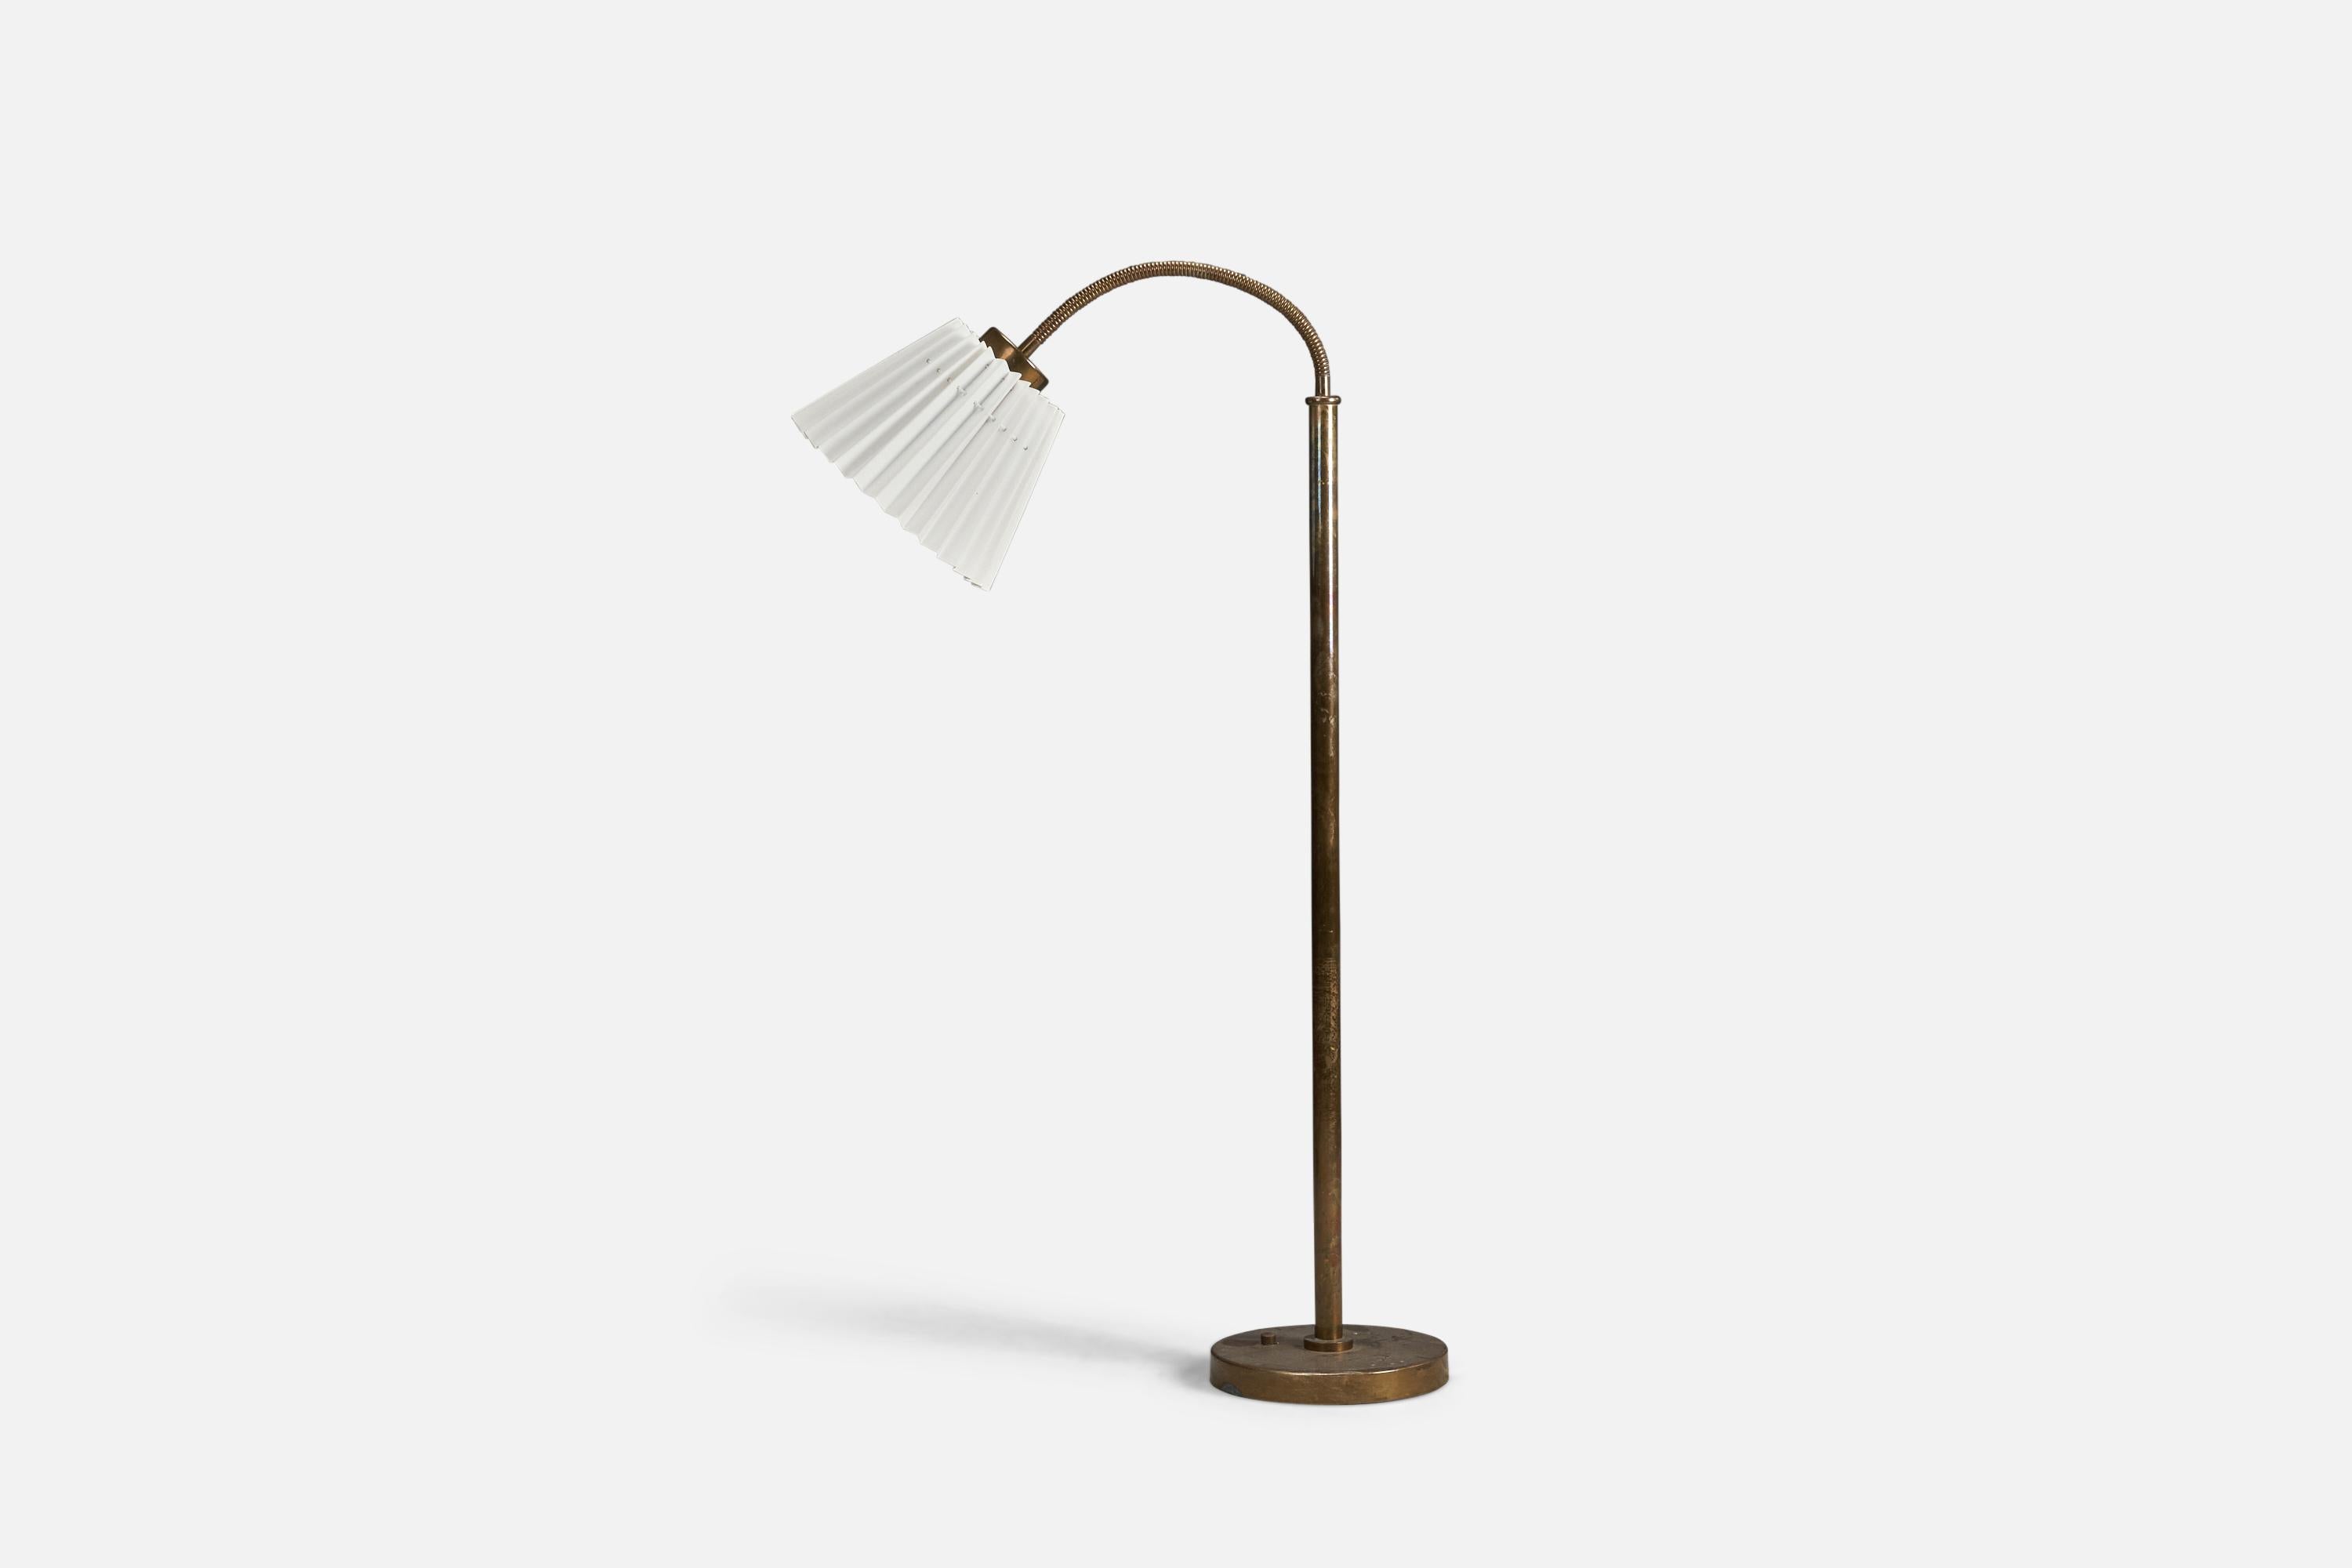 A brass and paper floor lamp designed by Josef Frank and produced by Svenskt Tenn, Sweden, 1940s.

Socket takes standard E-26 medium base bulb.

There is no maximum wattage stated on the fixture.